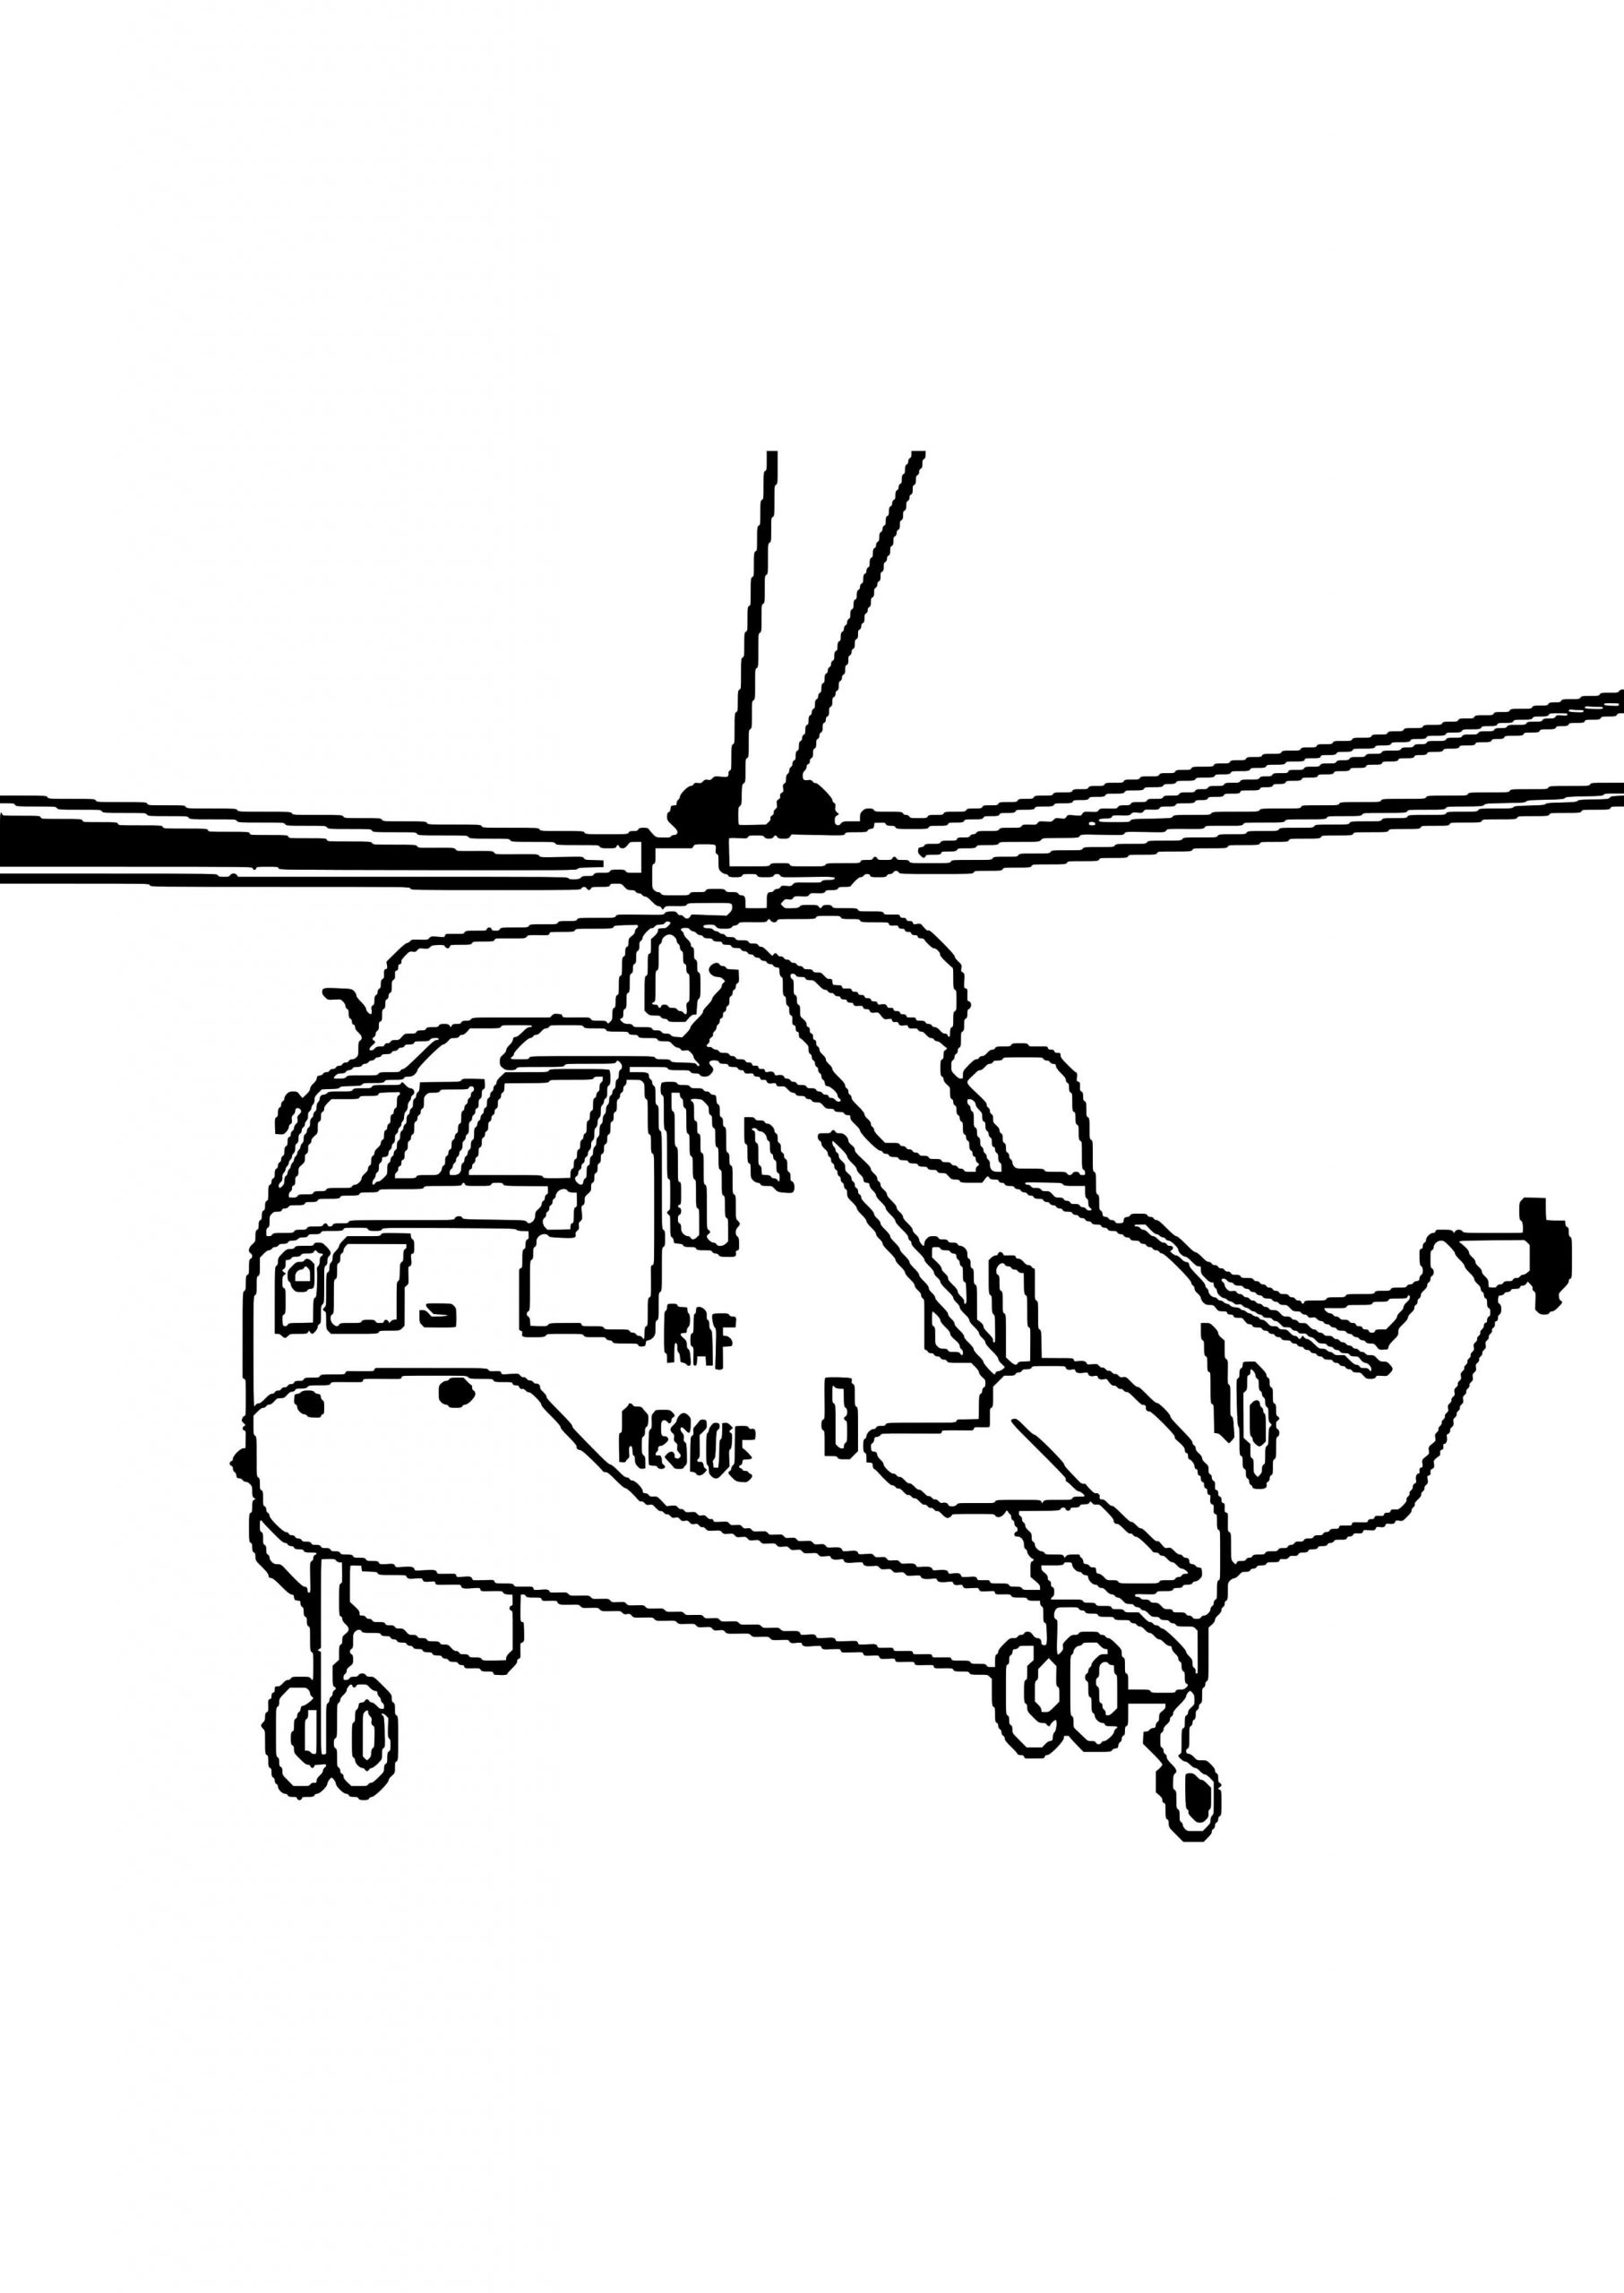 Coloriage Imprimer Helicoptere Militaire - Coloriage Imprimer serapportantà Helicoptere Dessin